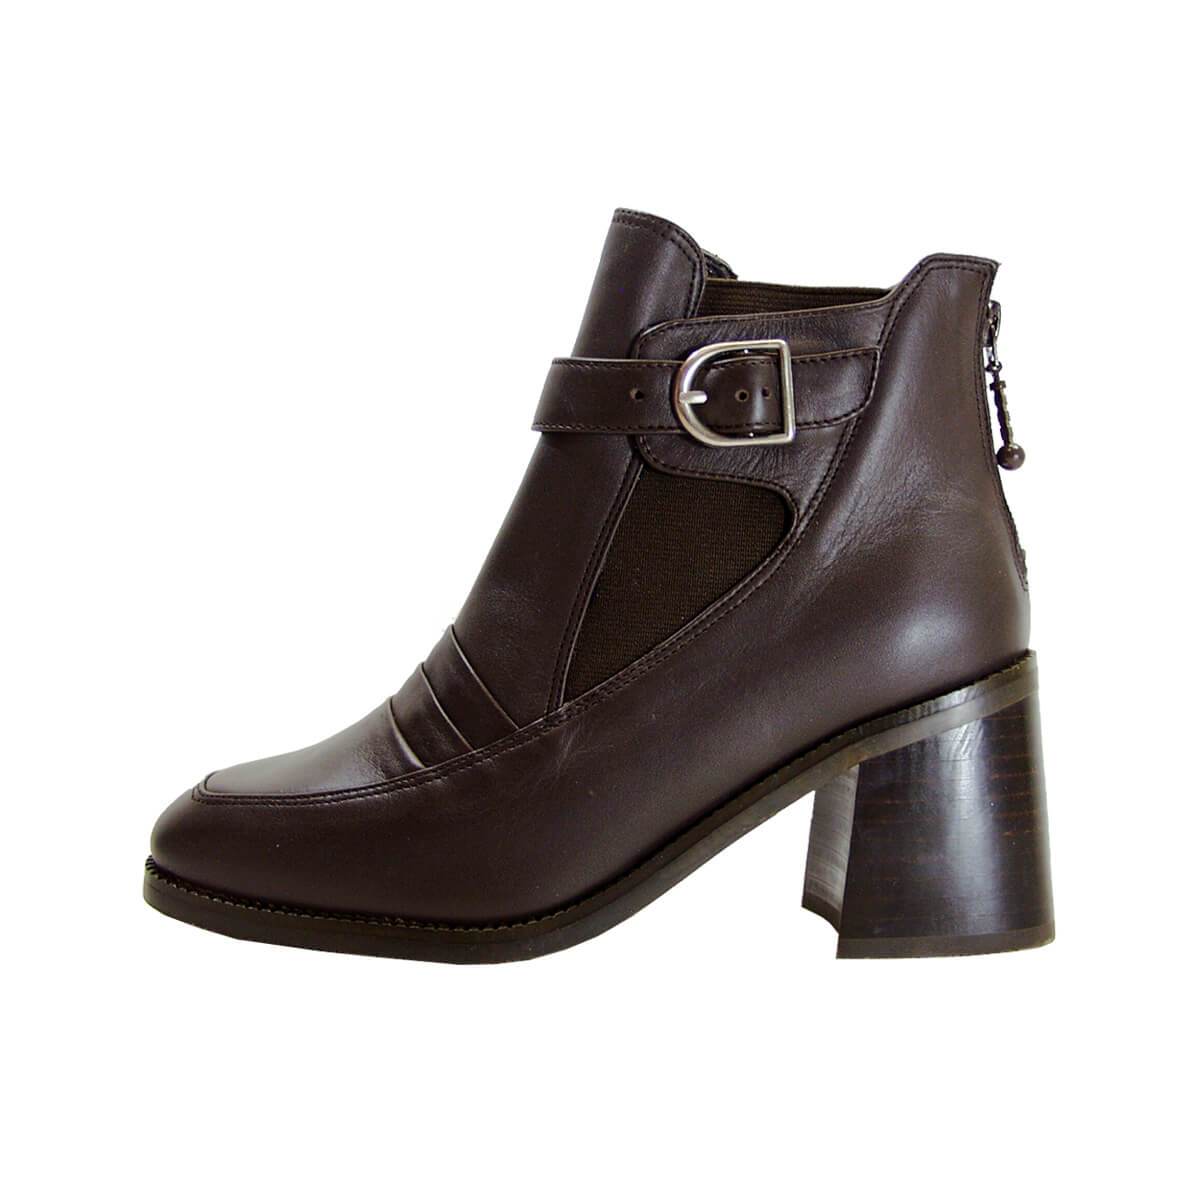 PEERAGE Orla Women's Wide Width Leather Ankle Boots